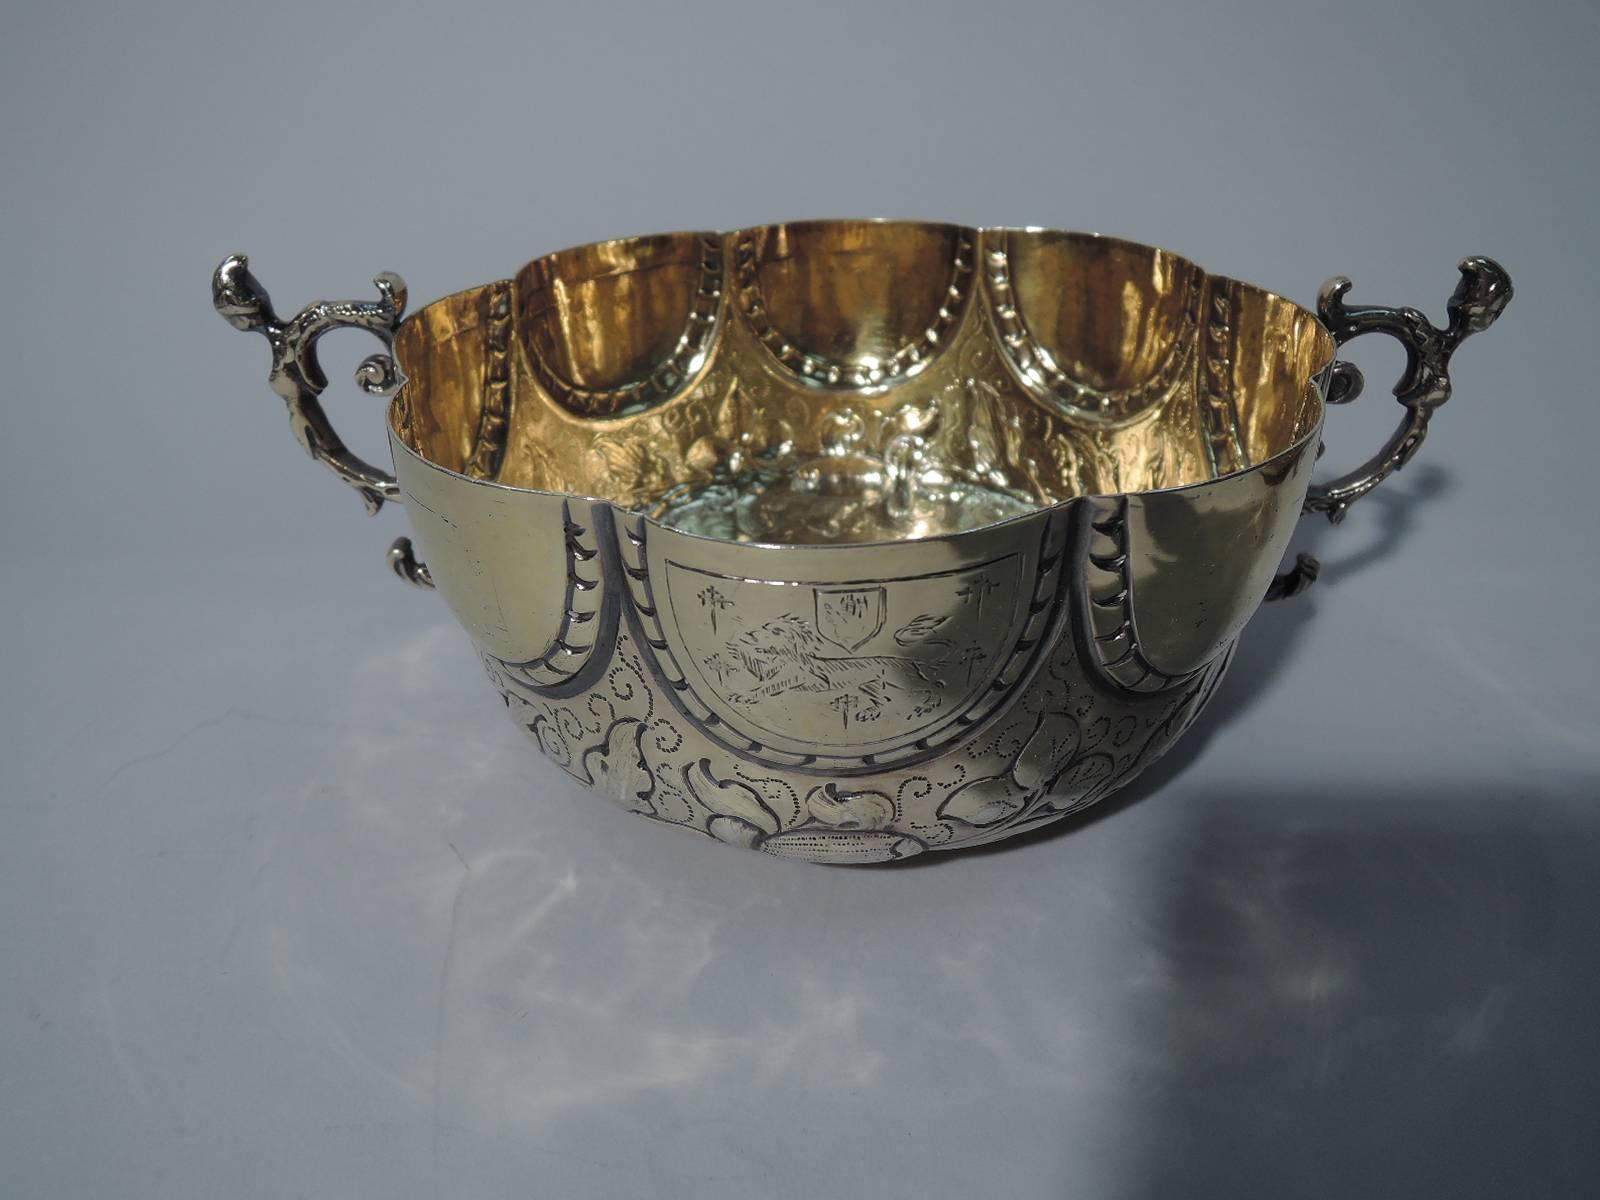 Pair of antique silver gilt bowls in late 17th-century English style. Each: round with short foot and leaf-capped double-scroll handles. Lunettes (one with engraved armorial), and flowers and foliage. Pretty pieces in Ye Olde English taste.